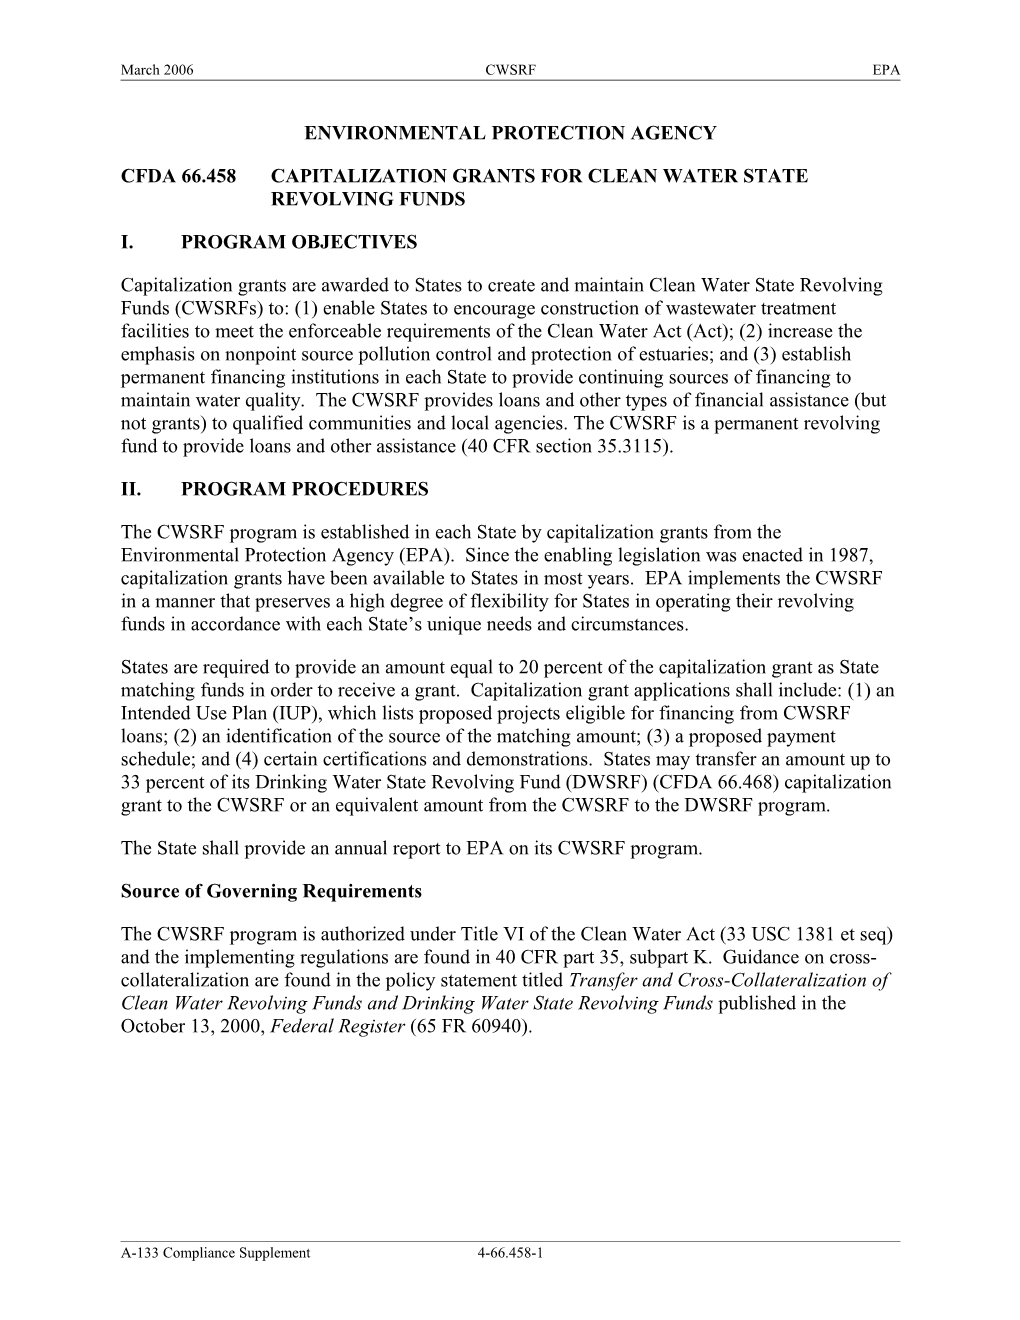 Cfda 66.458Capitalization Grants for Clean Water State Revolving Funds